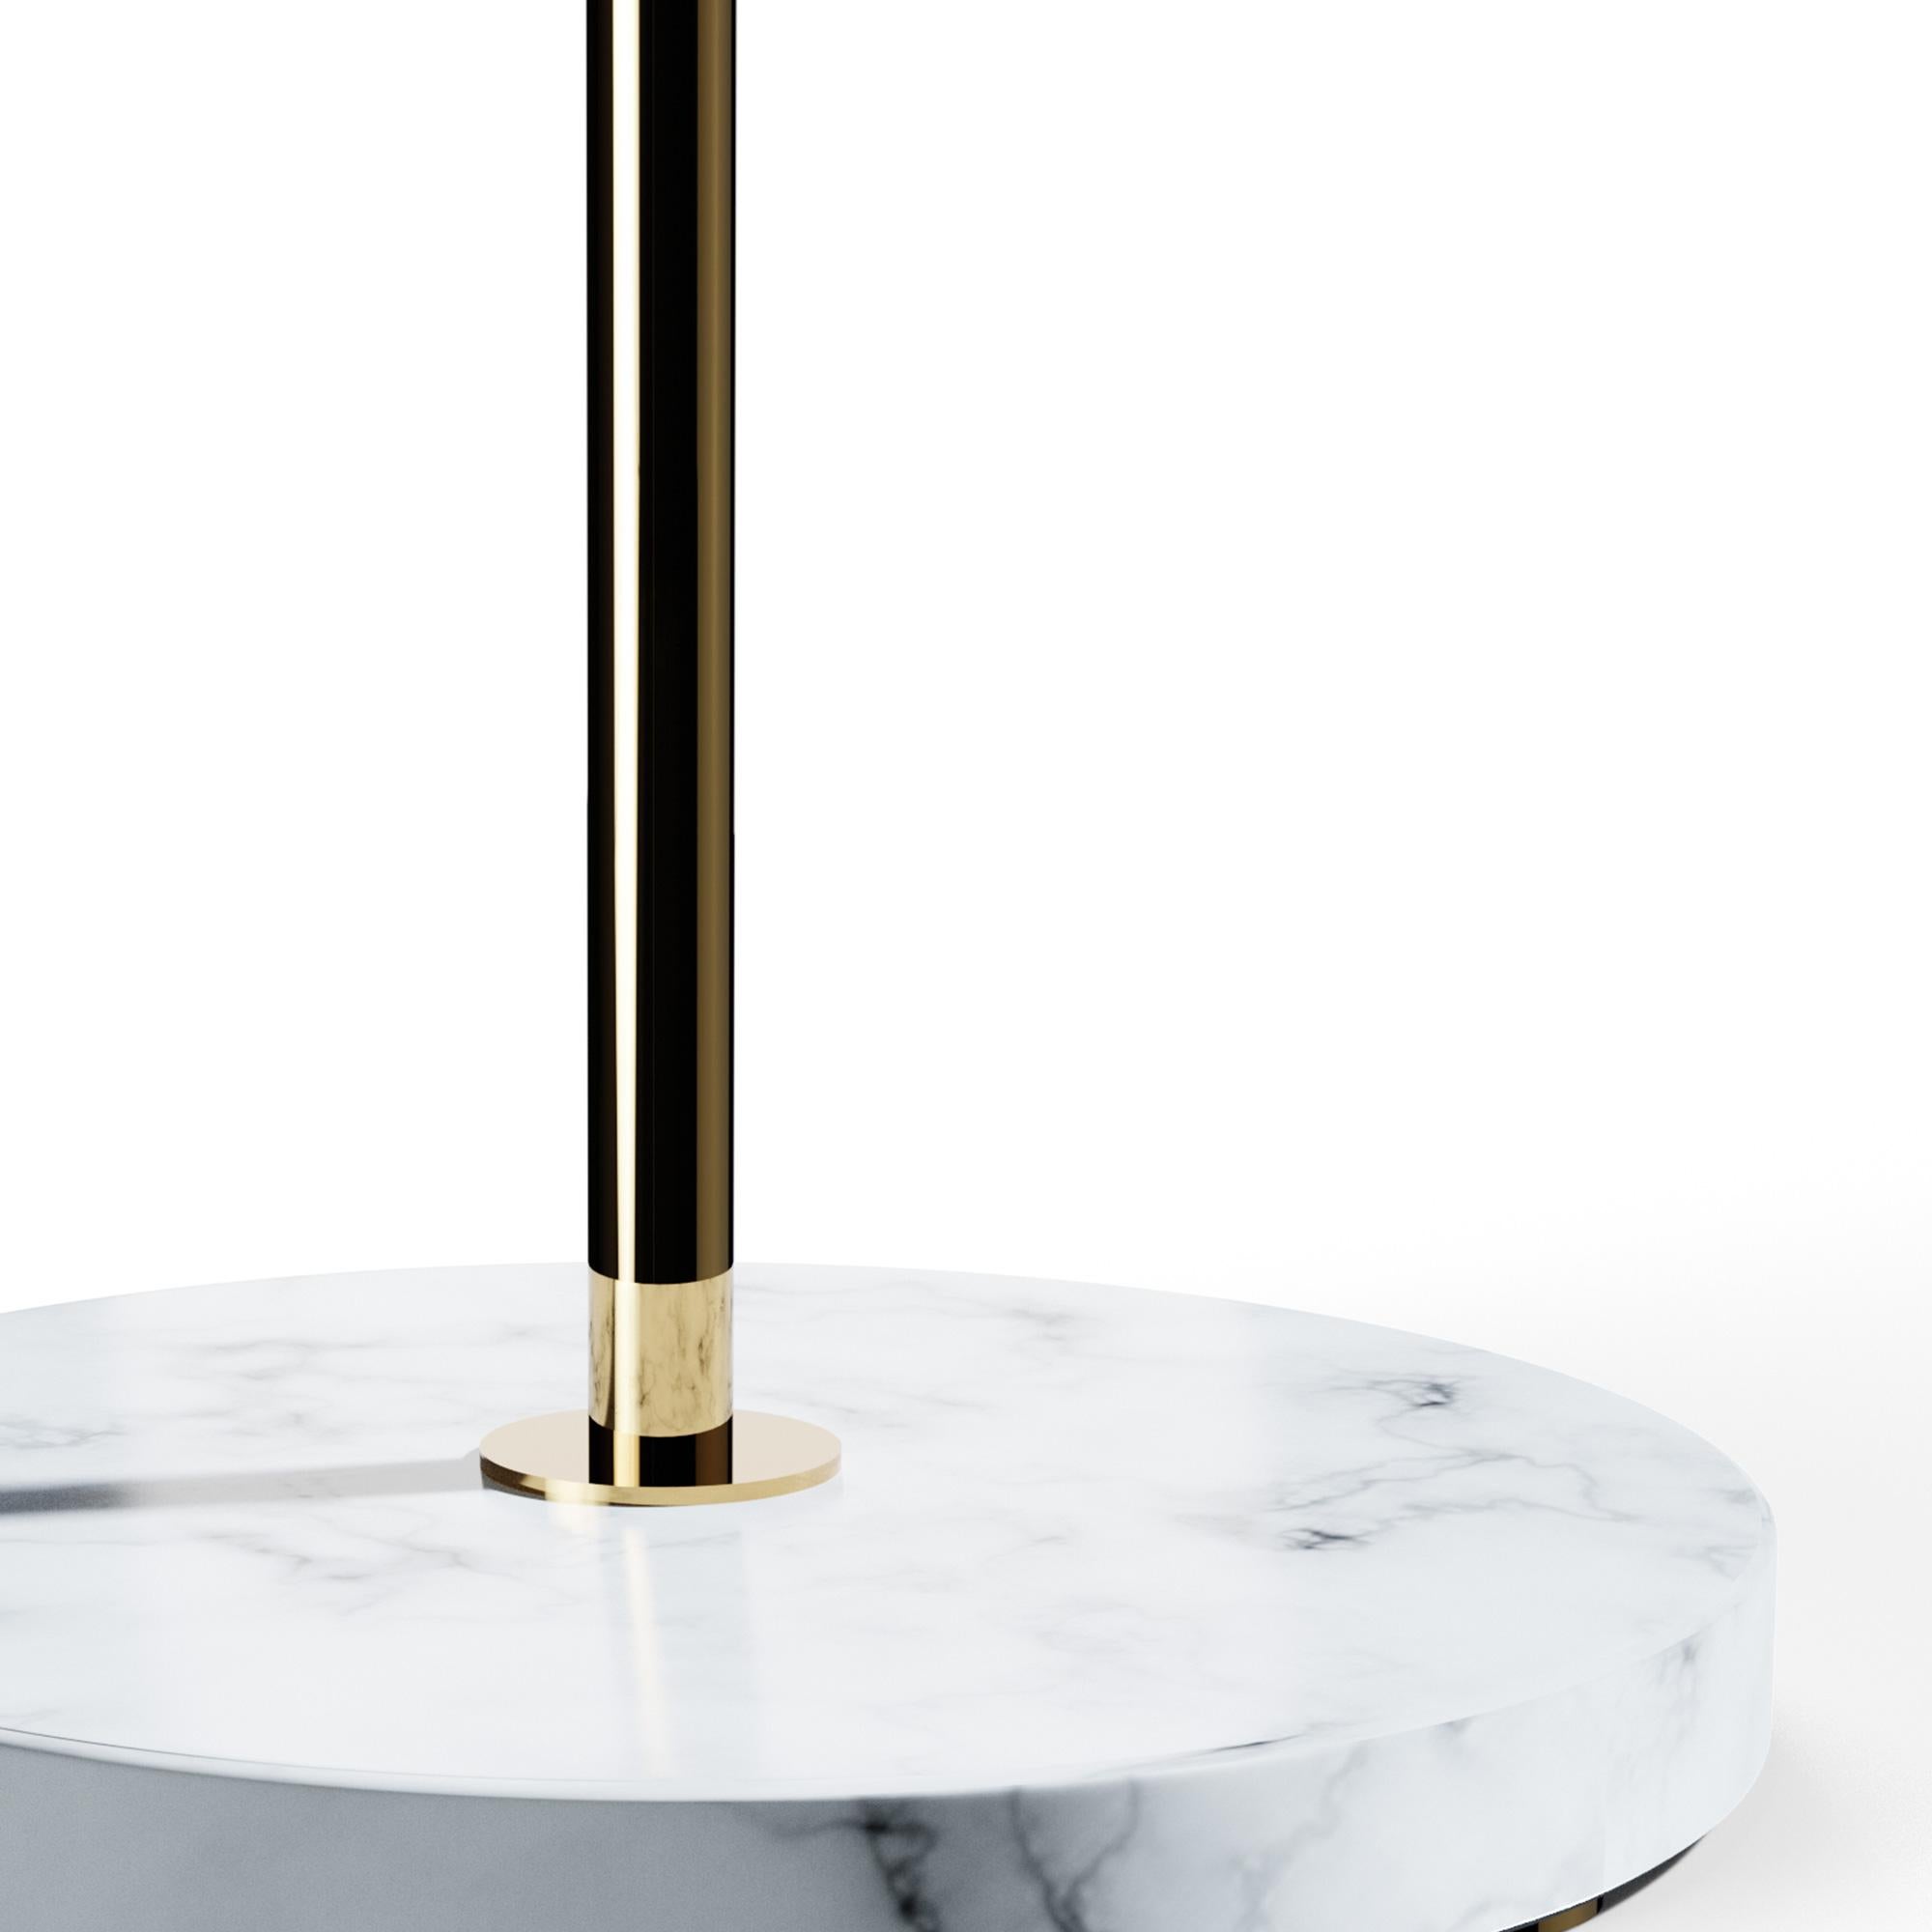 Large Joseph-André Motte J14 Floor Lamp in Polished Brass & Marble for Disderot In New Condition For Sale In Glendale, CA